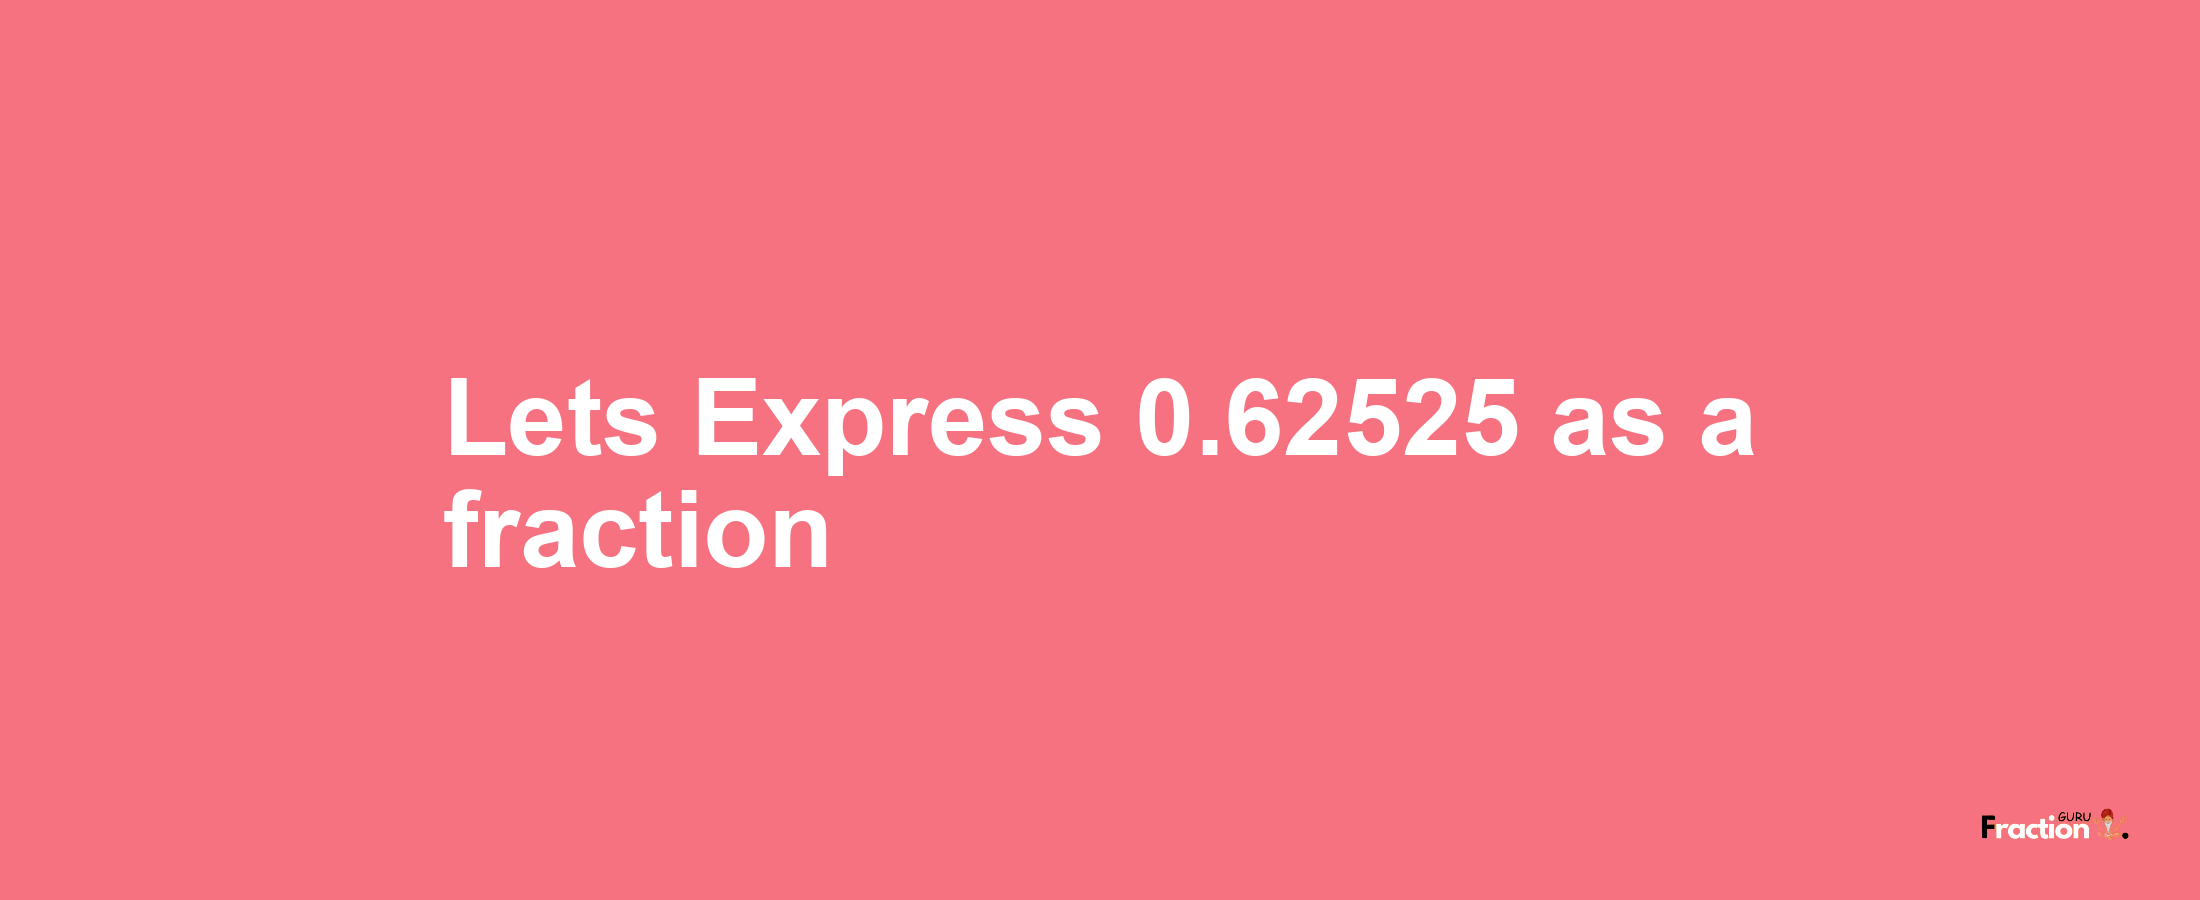 Lets Express 0.62525 as afraction